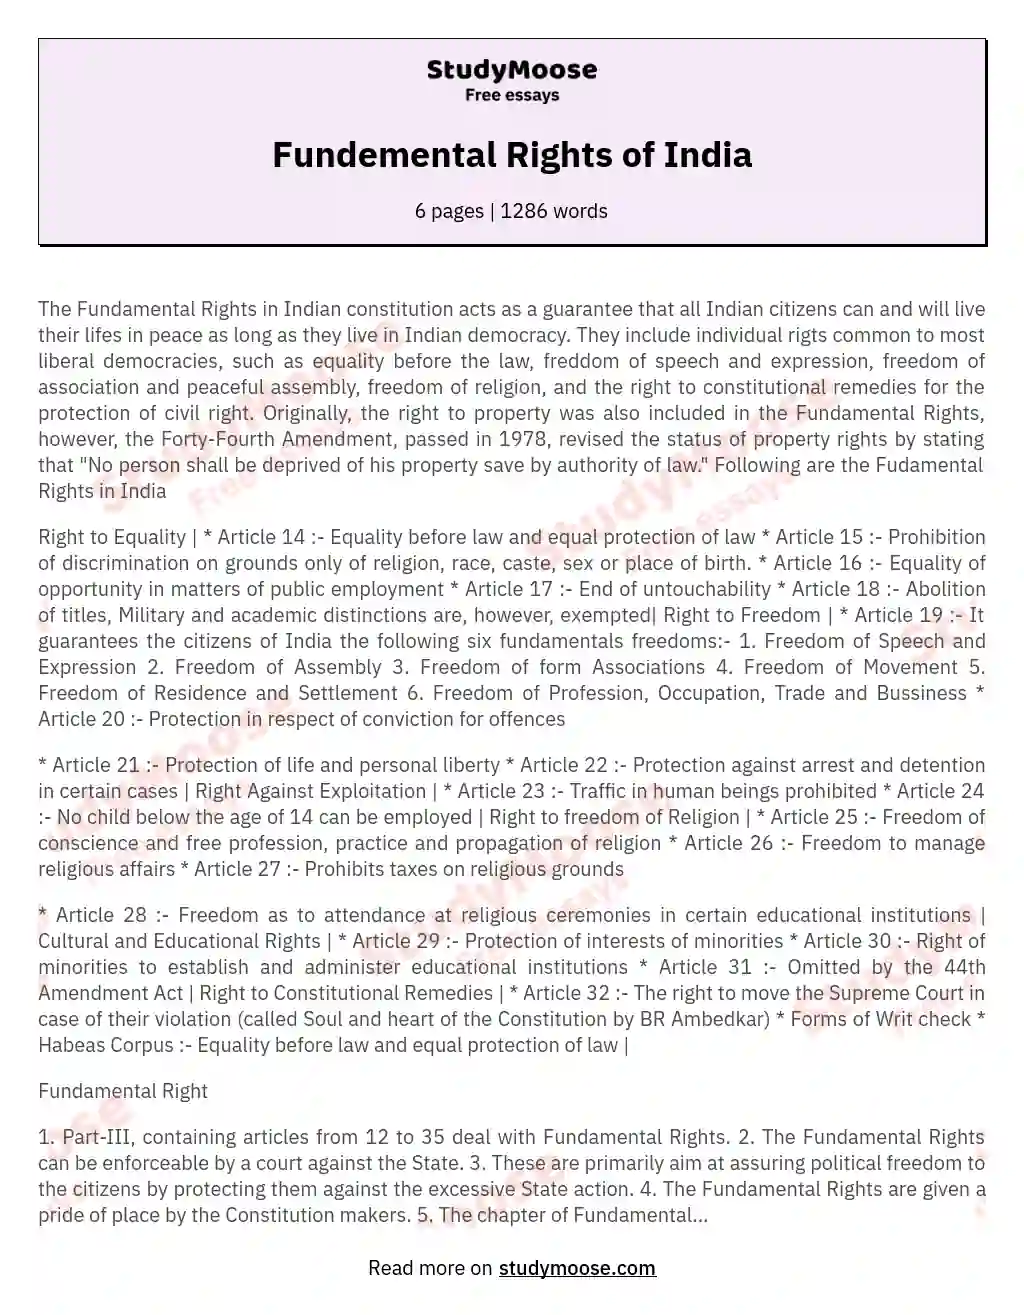 Fundemental Rights of India essay